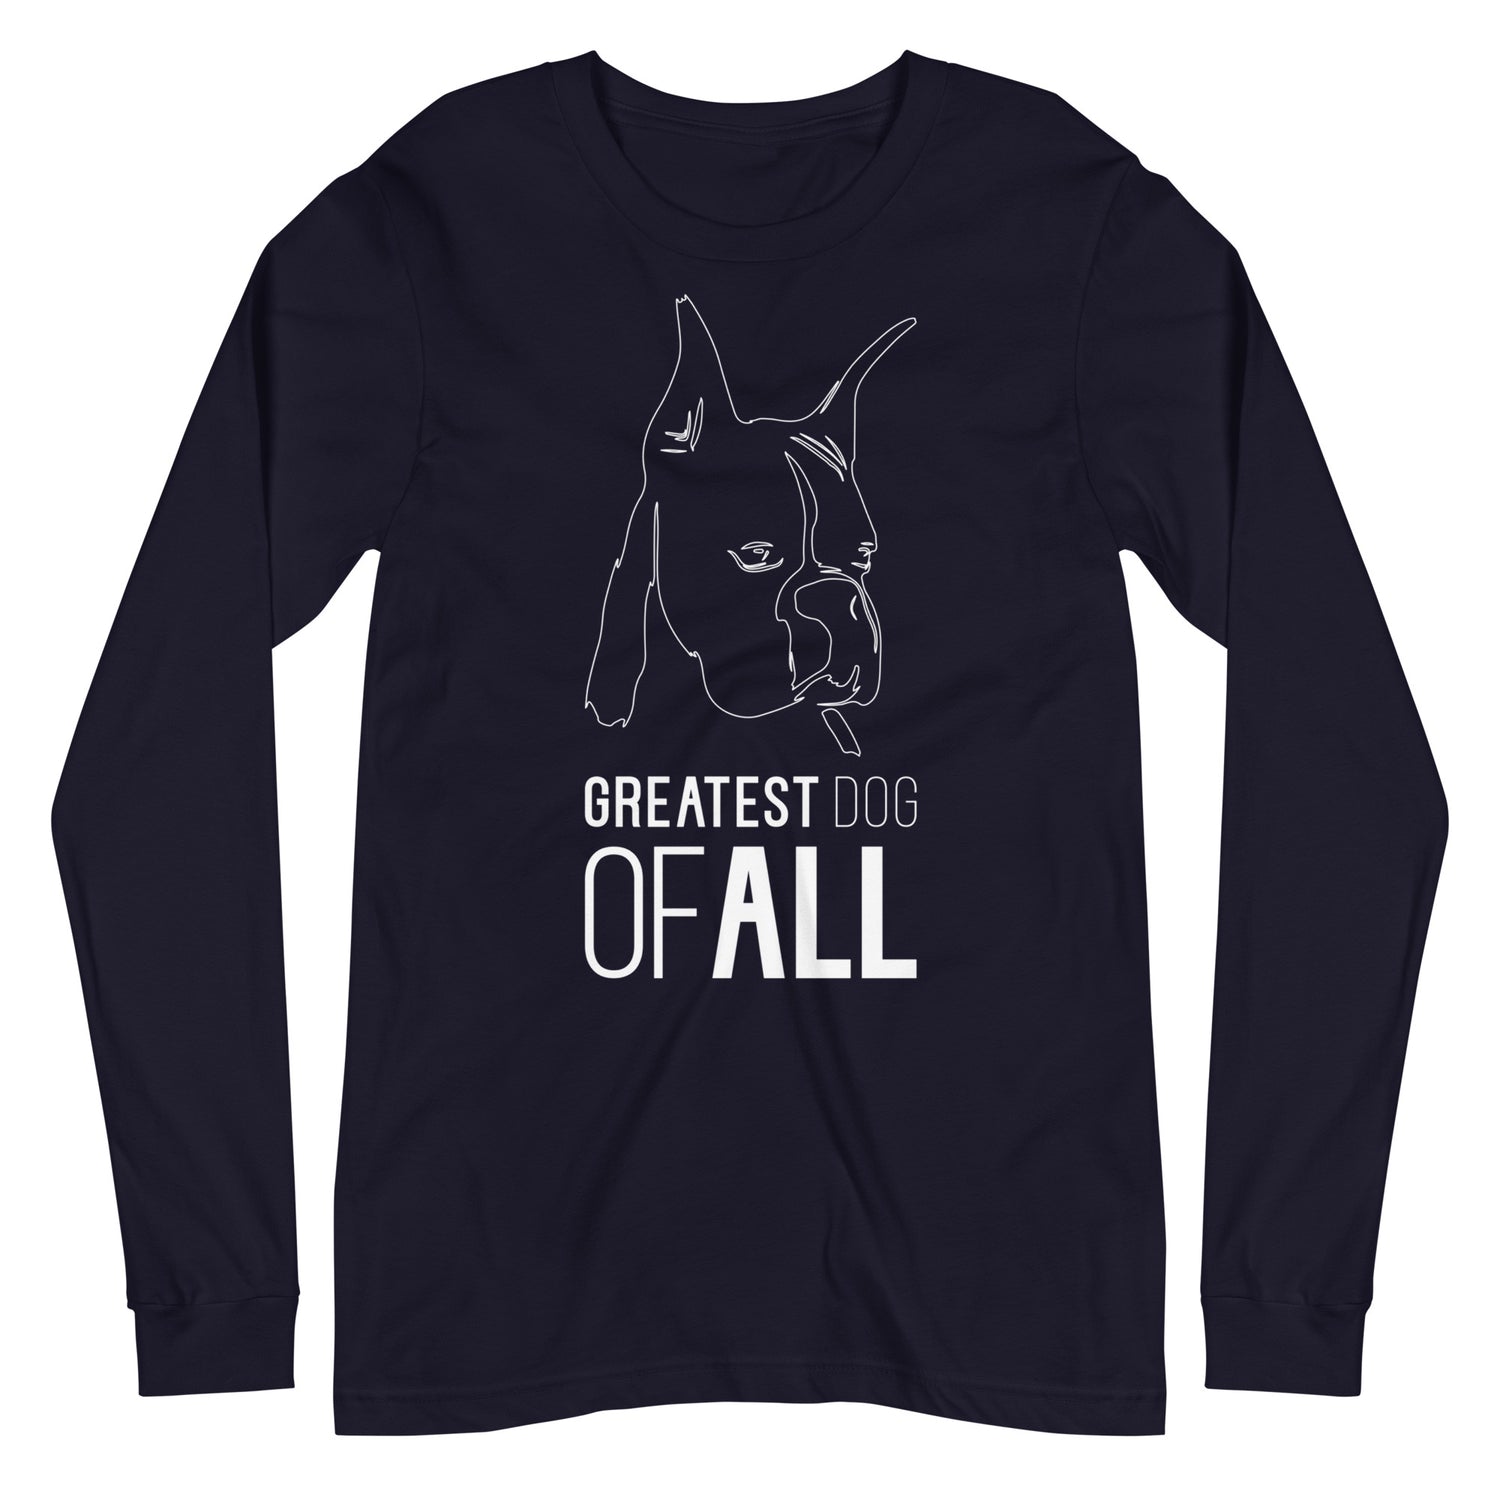 White line Boxer face with Greatest Dog of All caption on unisex navy long sleeve t-shirt